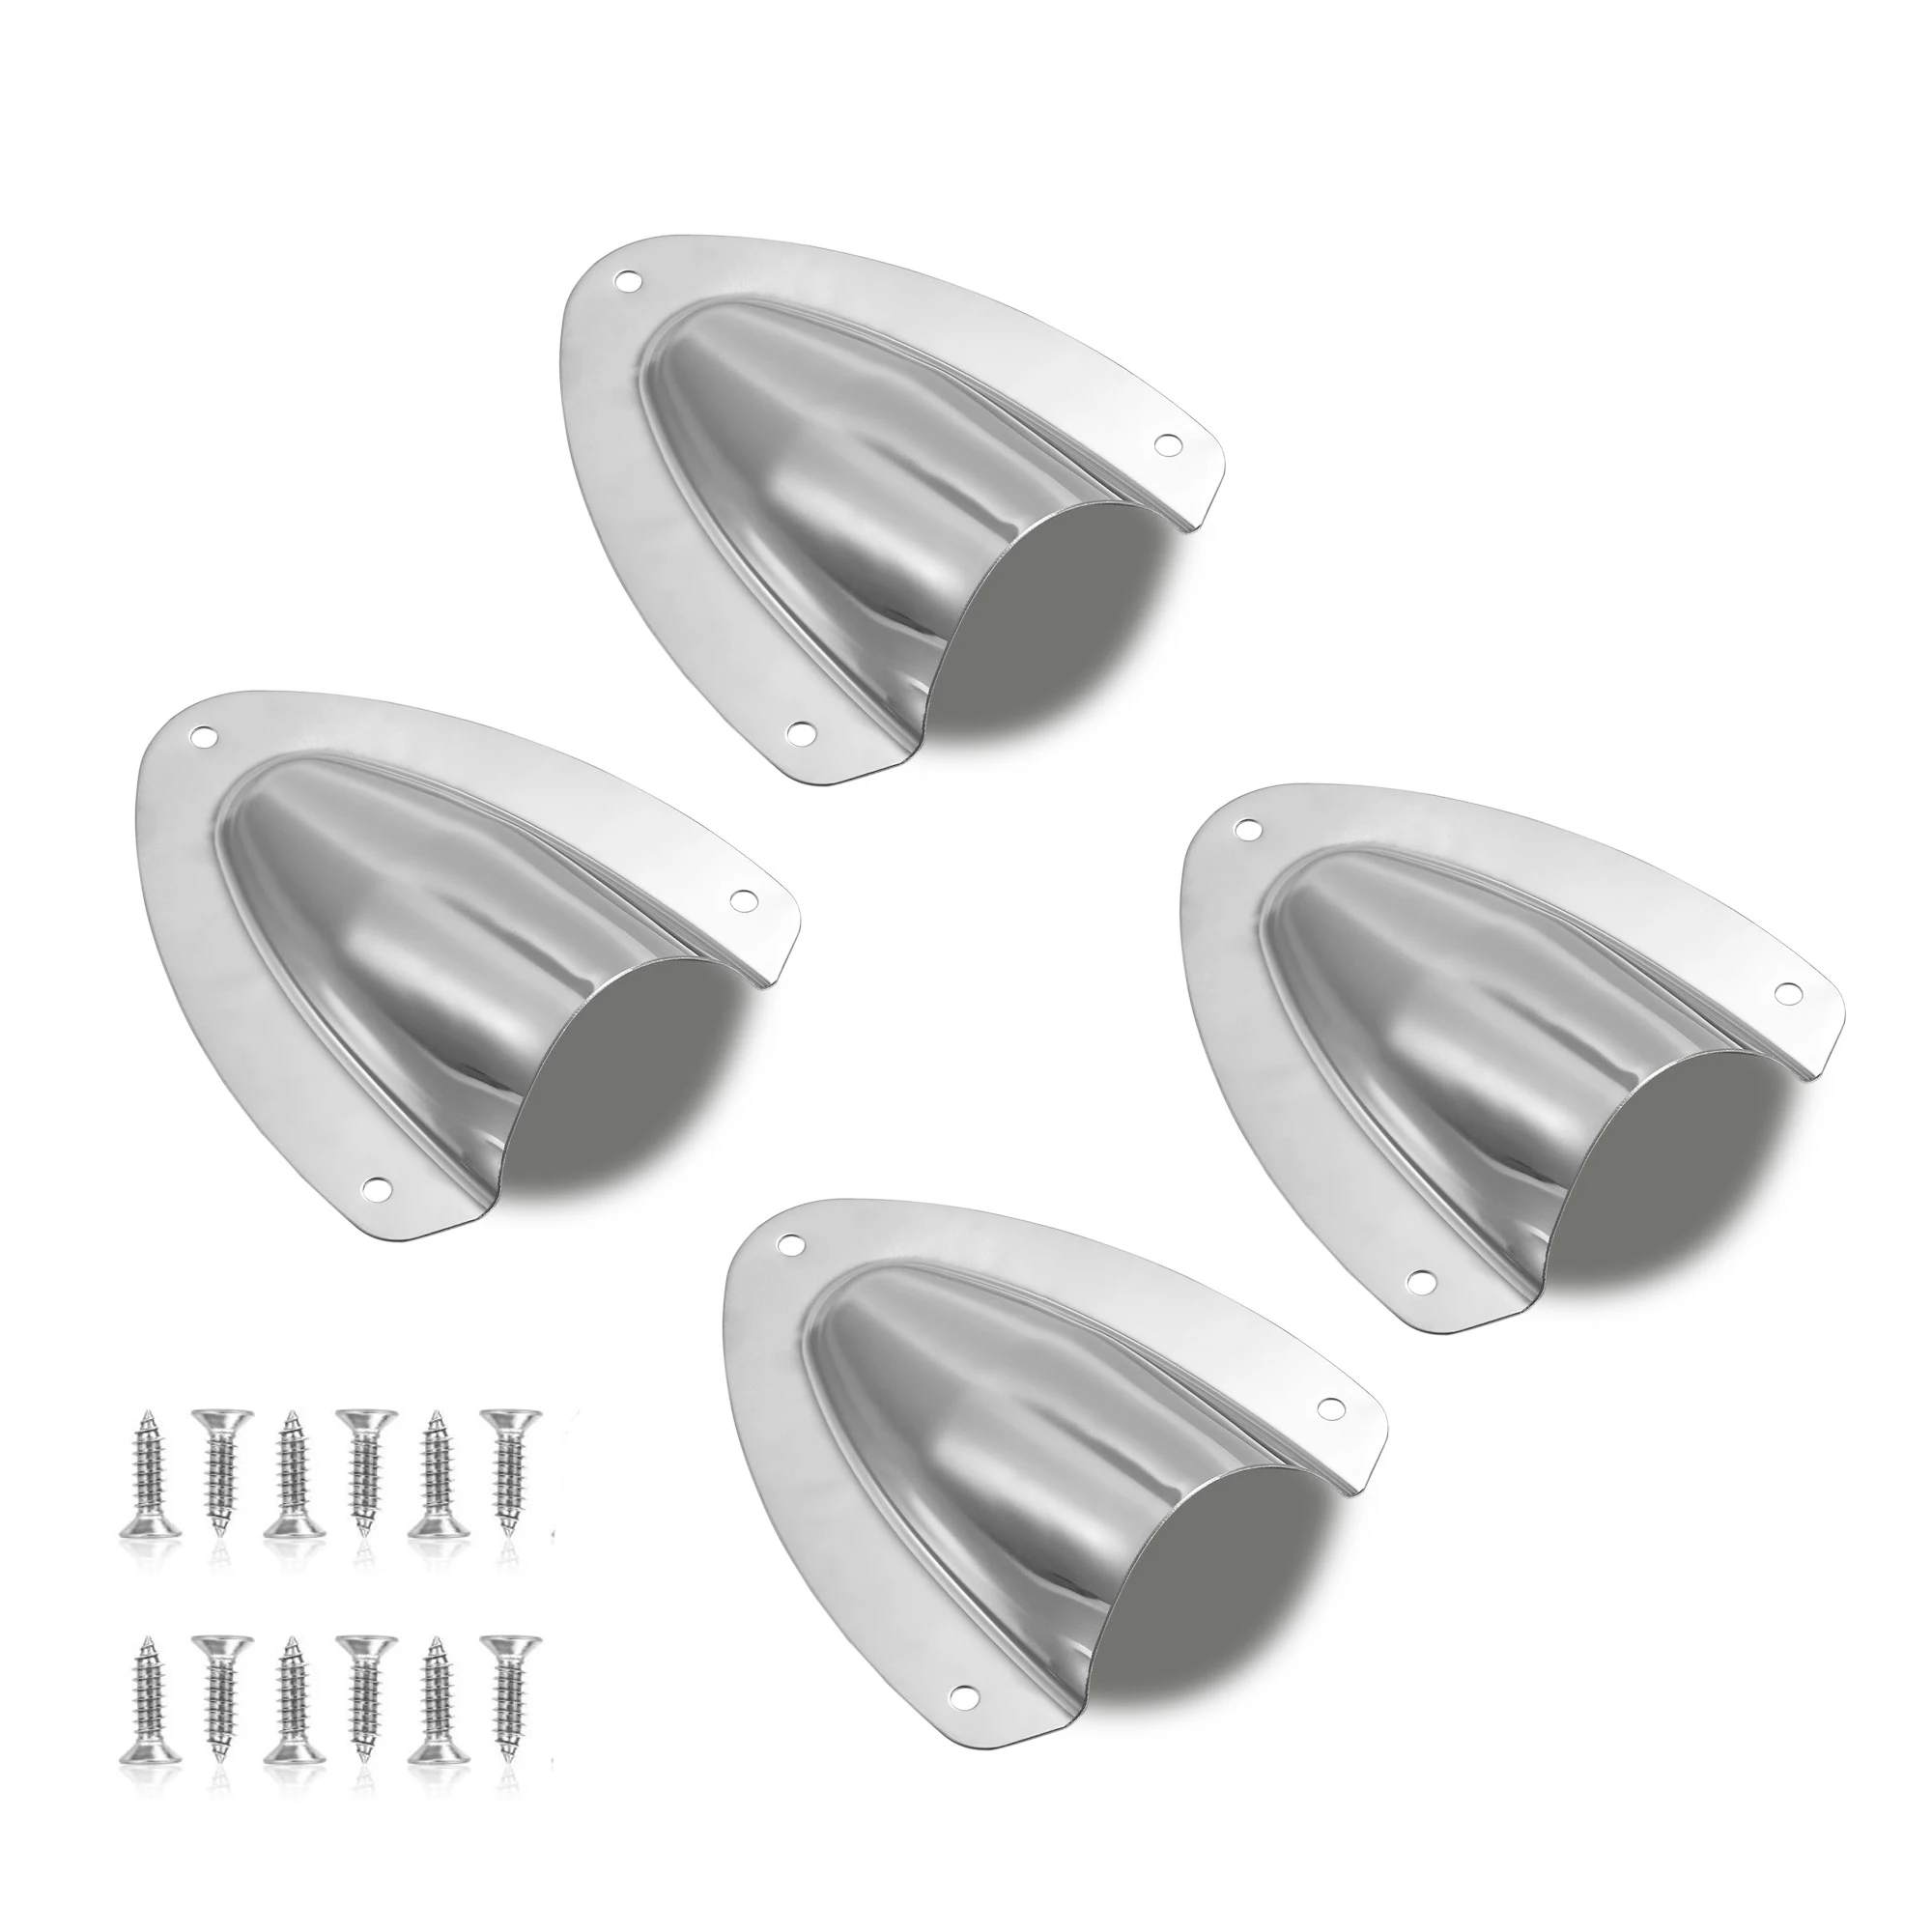 4 Packs Clam shell Vent for Boat, Size 1.53X1.77 Inch (39X45mm ), Stainless Steel Clamshell Vent, with 12 Pcs Screws marine grade 316 stainless steel large clam shell vent wire cable cover for boat marine